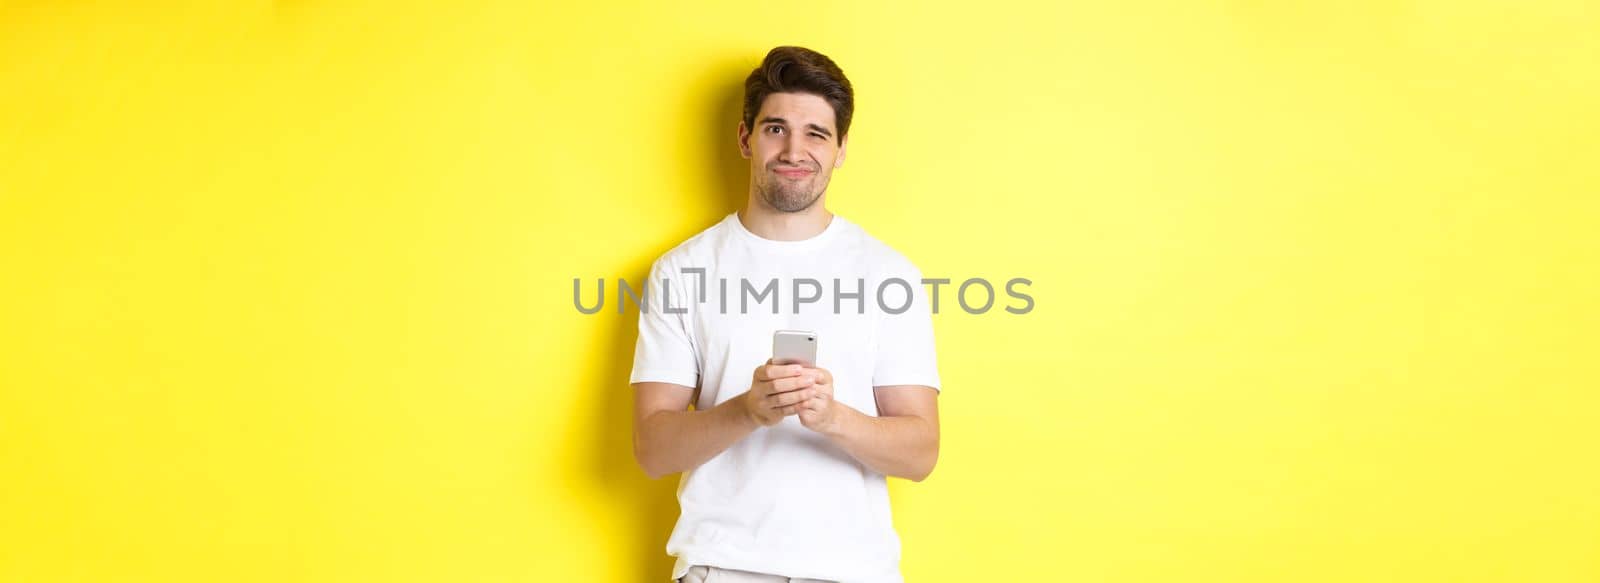 Displeased and reluctant man grimacing, being unamused by message on smartphone, standing over yellow background.